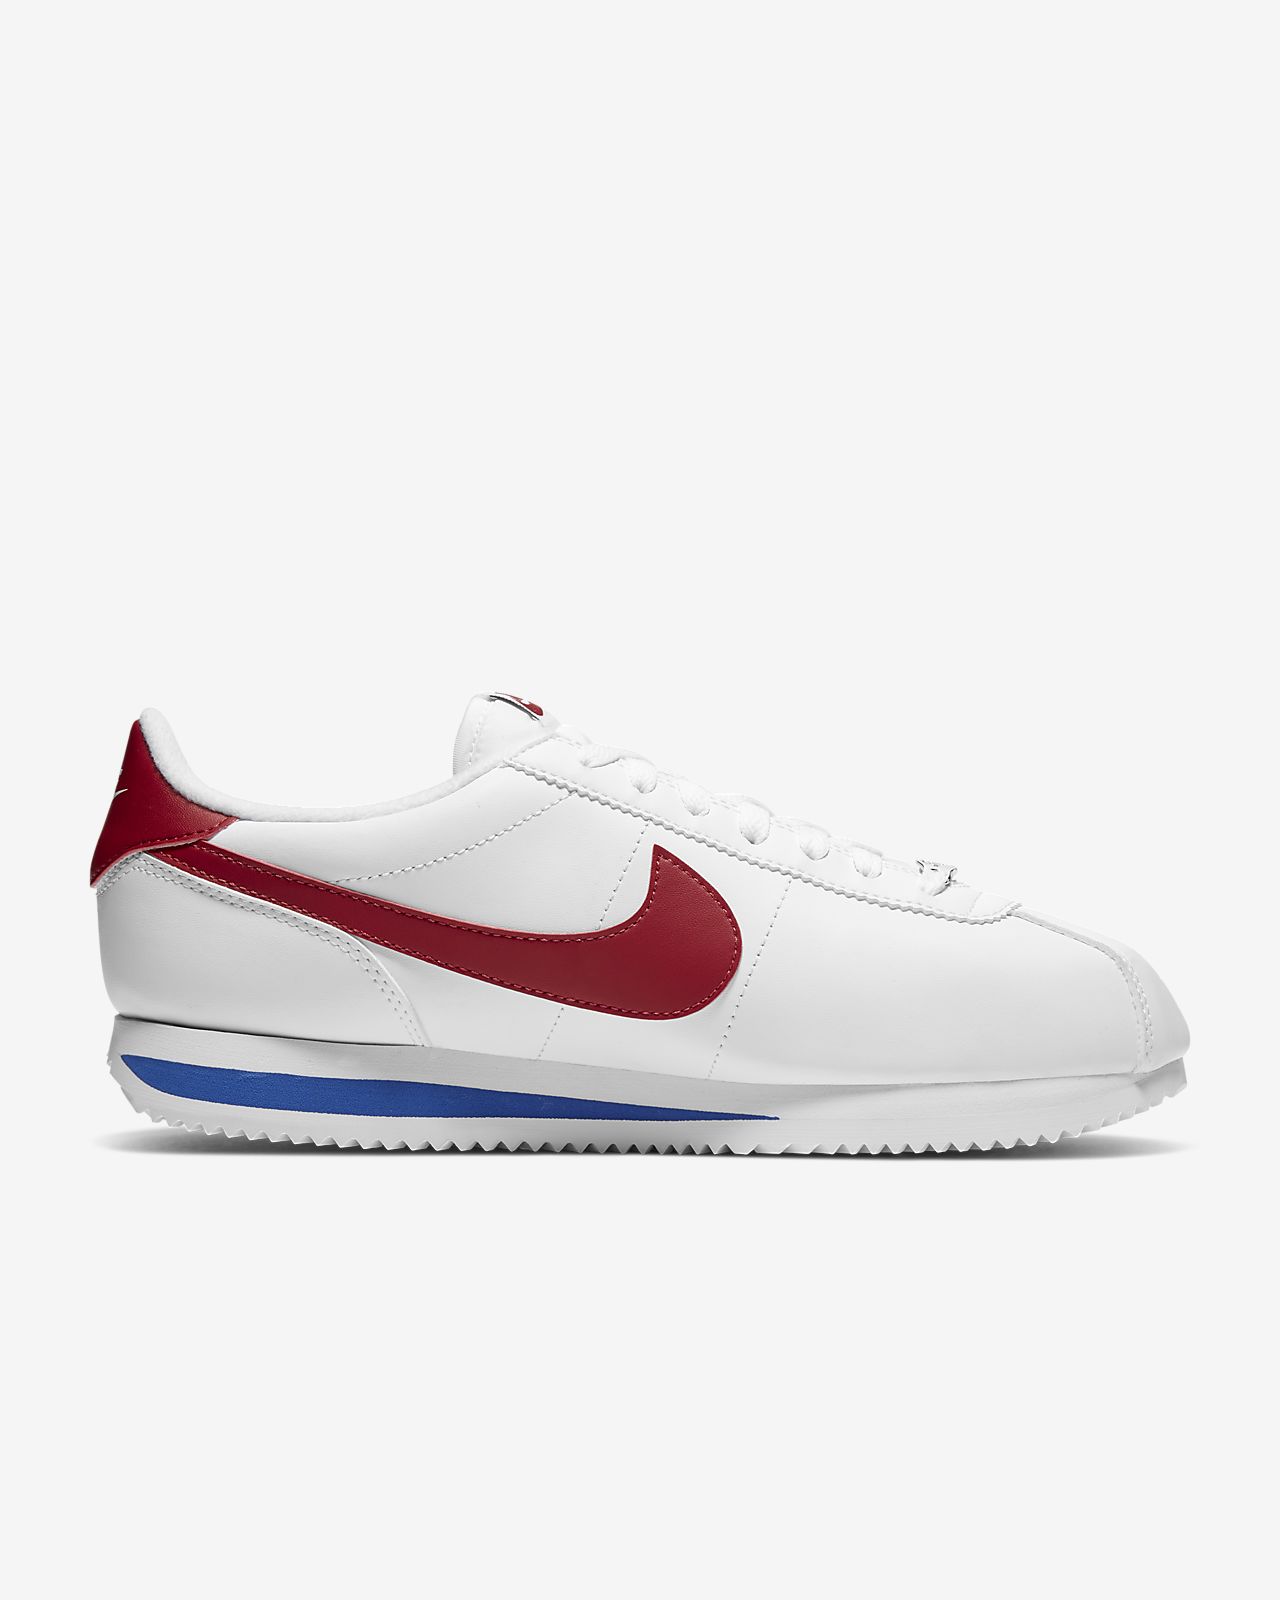 white air forces with red nike sign